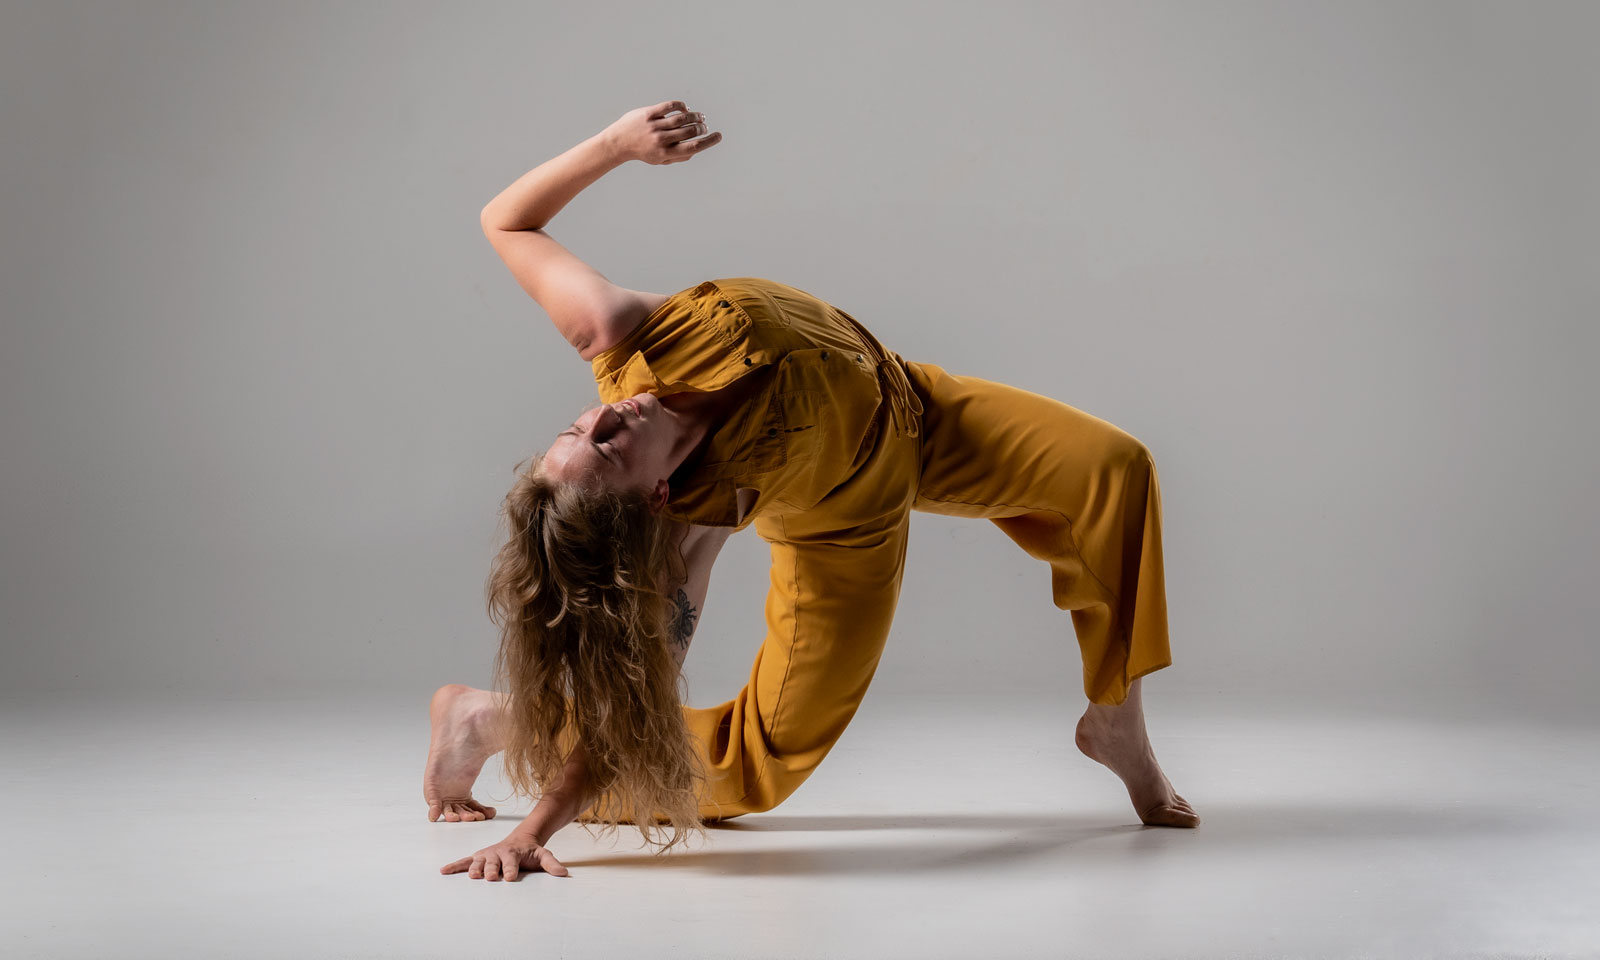 push/FOLD dancer Molly Rea wearing bright yellow overalls in full body twist on hands and feet at Cobalt Studios in Portland, Oregon | Photography: Samuel Hobbs